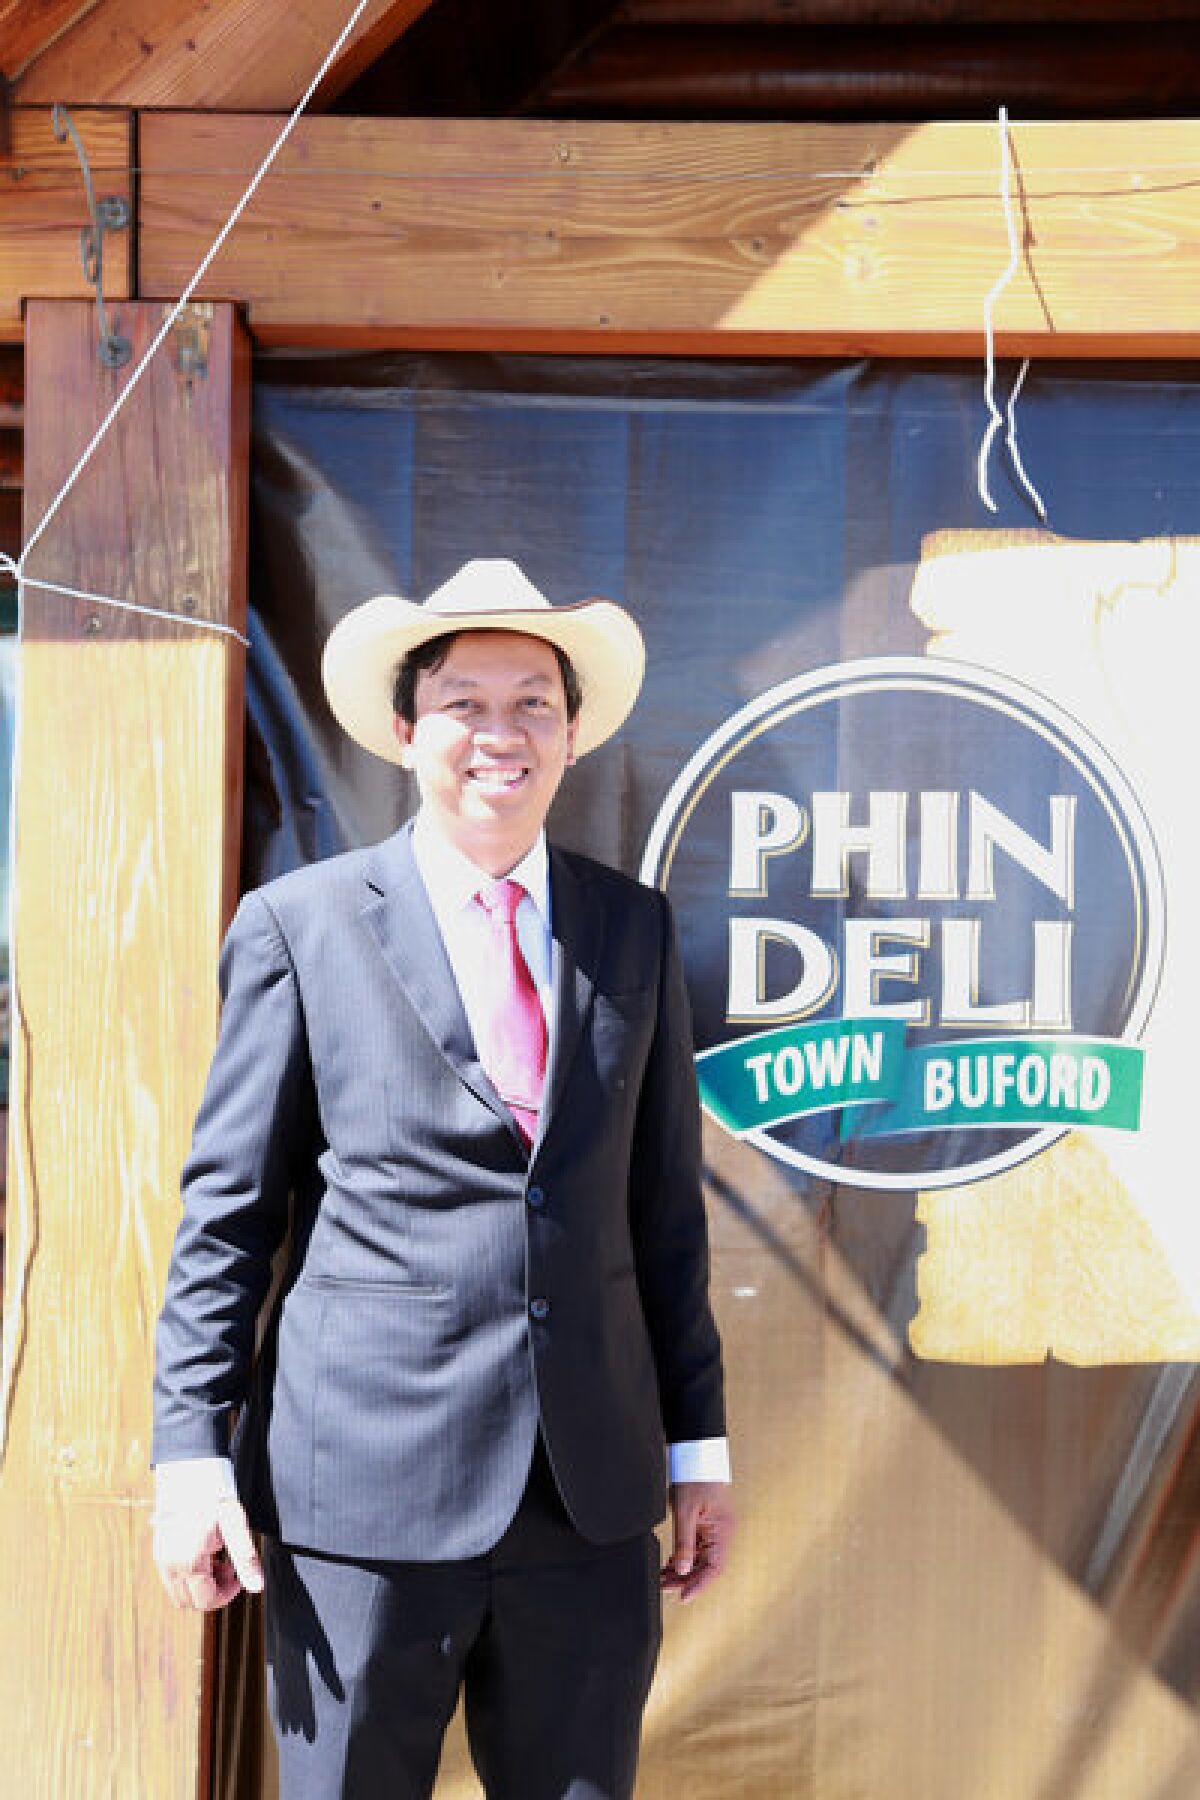 Town owner Pham tries out some Wyoming wear in front of a sign for his PhinDeli coffee. The name PhinDeli translates to "delicious filter coffee."